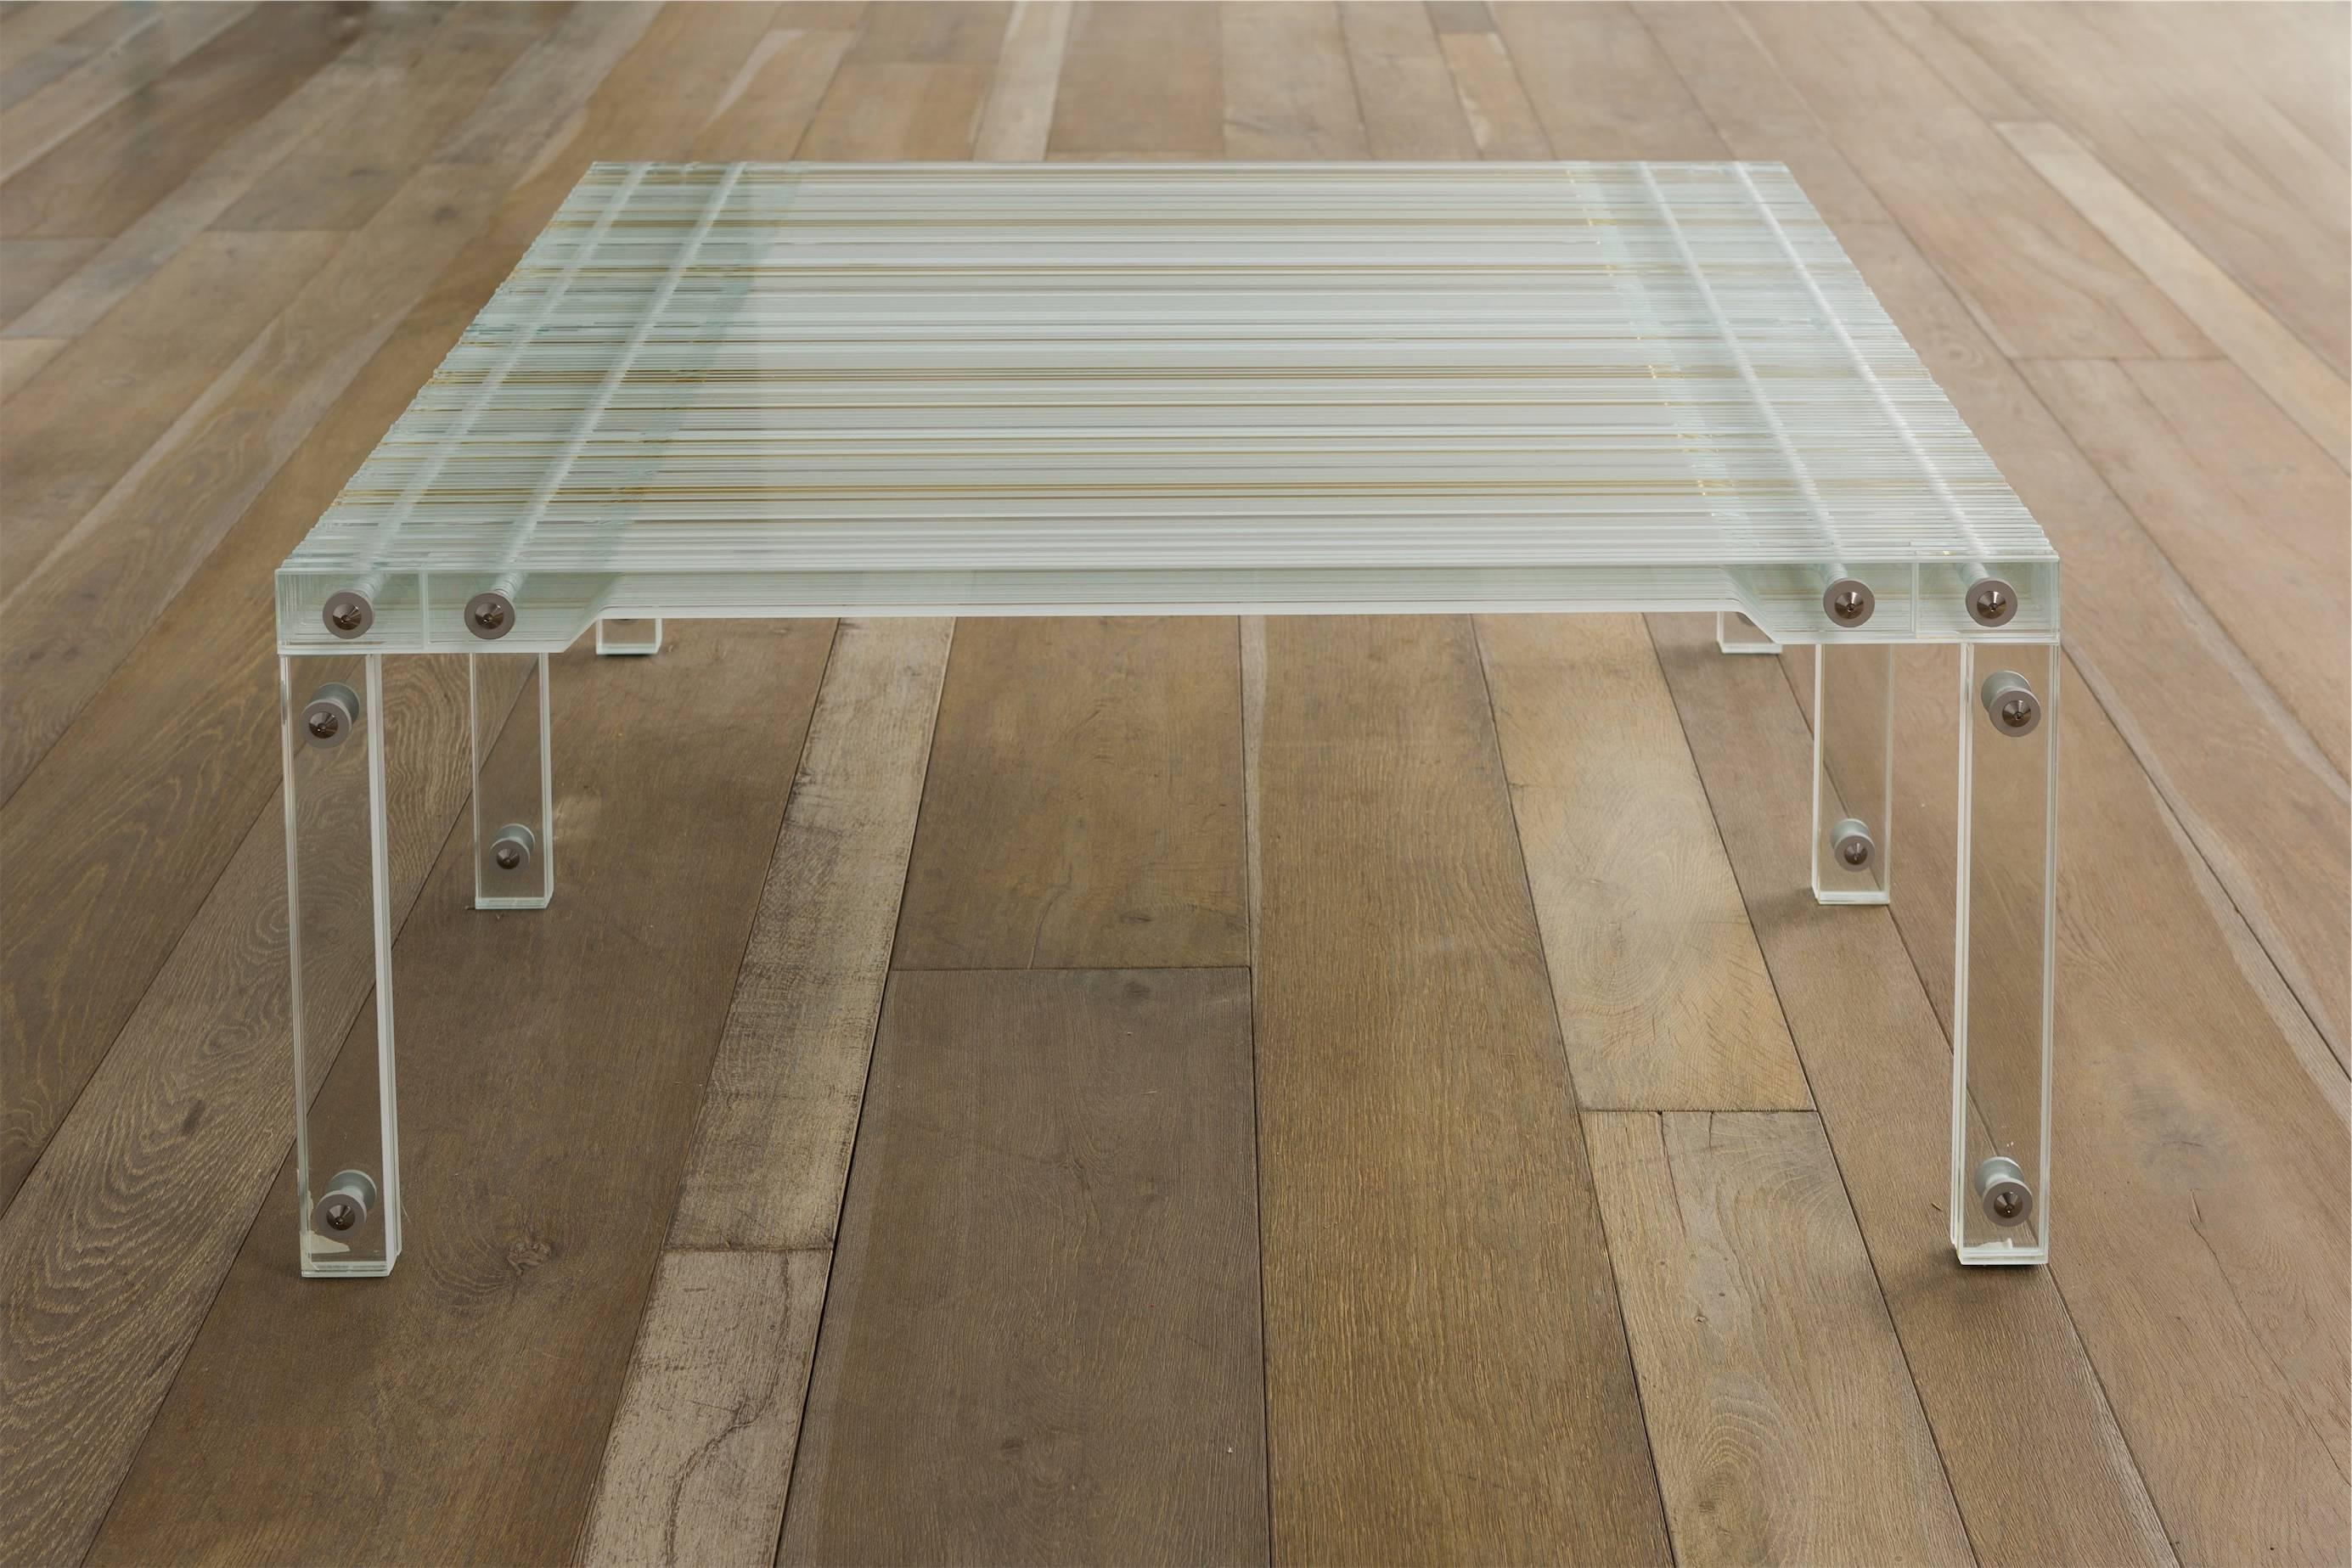 Coffee table made of strips of tempered glass by French designer Thomas Lemut.